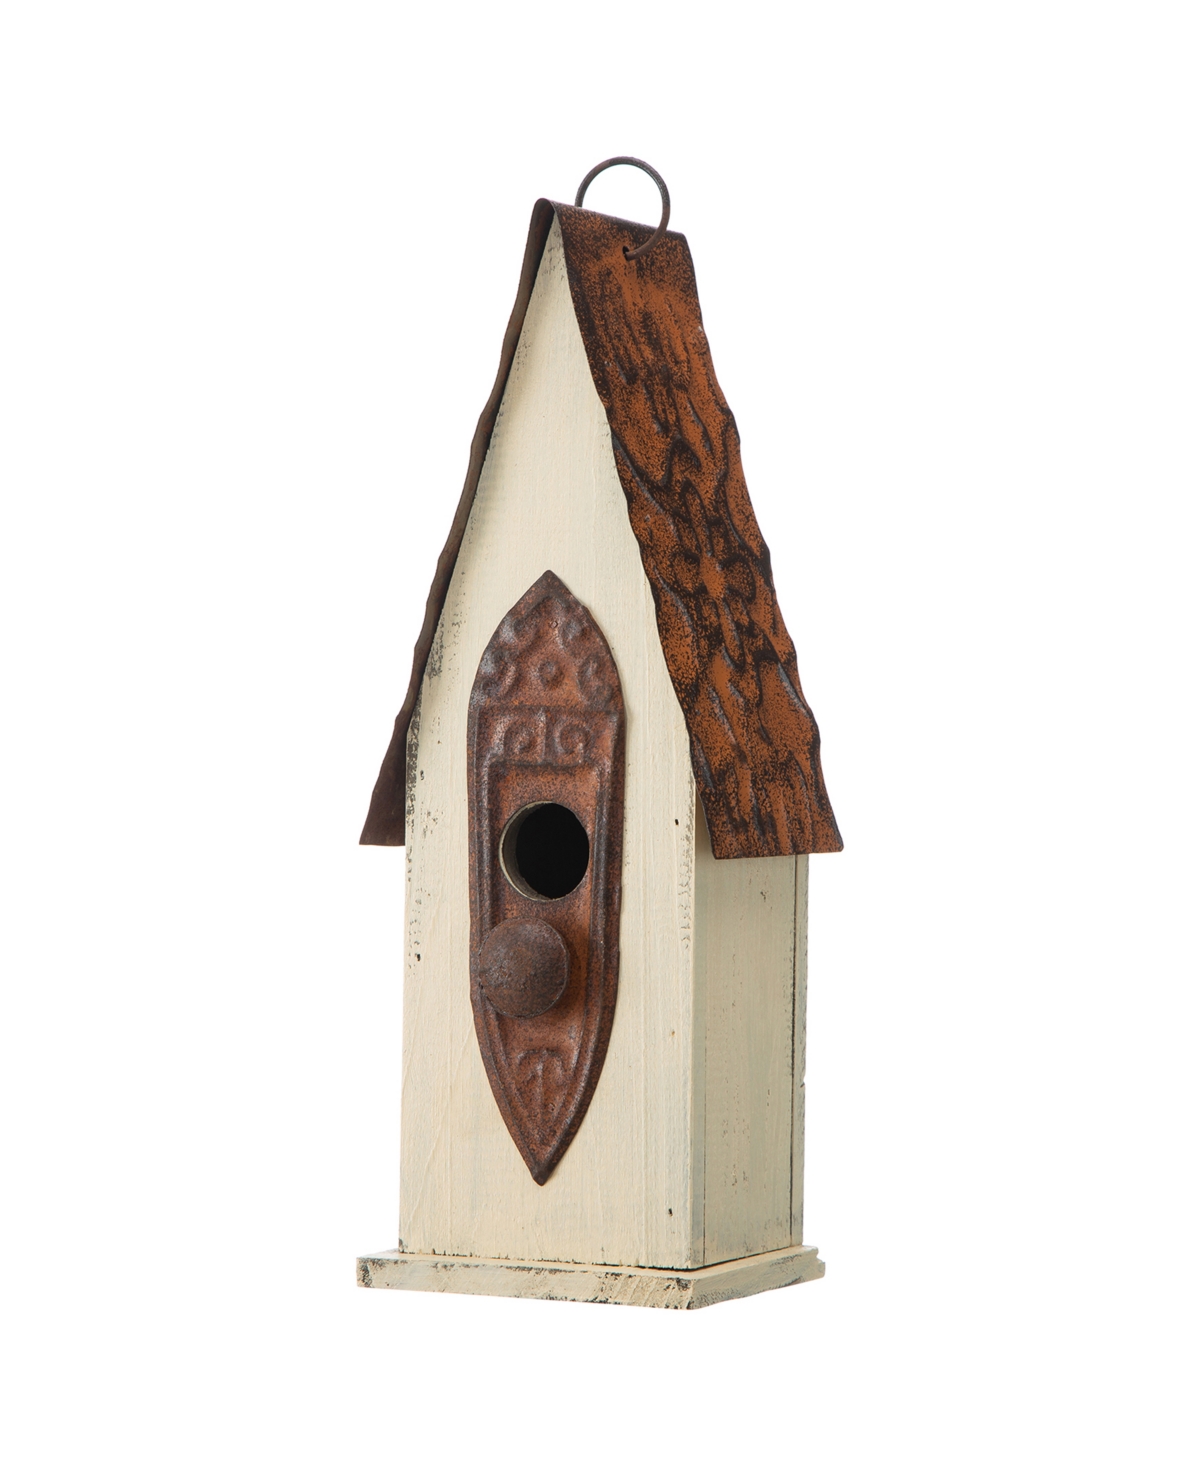 Glitzhome 13.25" Washed Distressed Birdhouse In Off-white